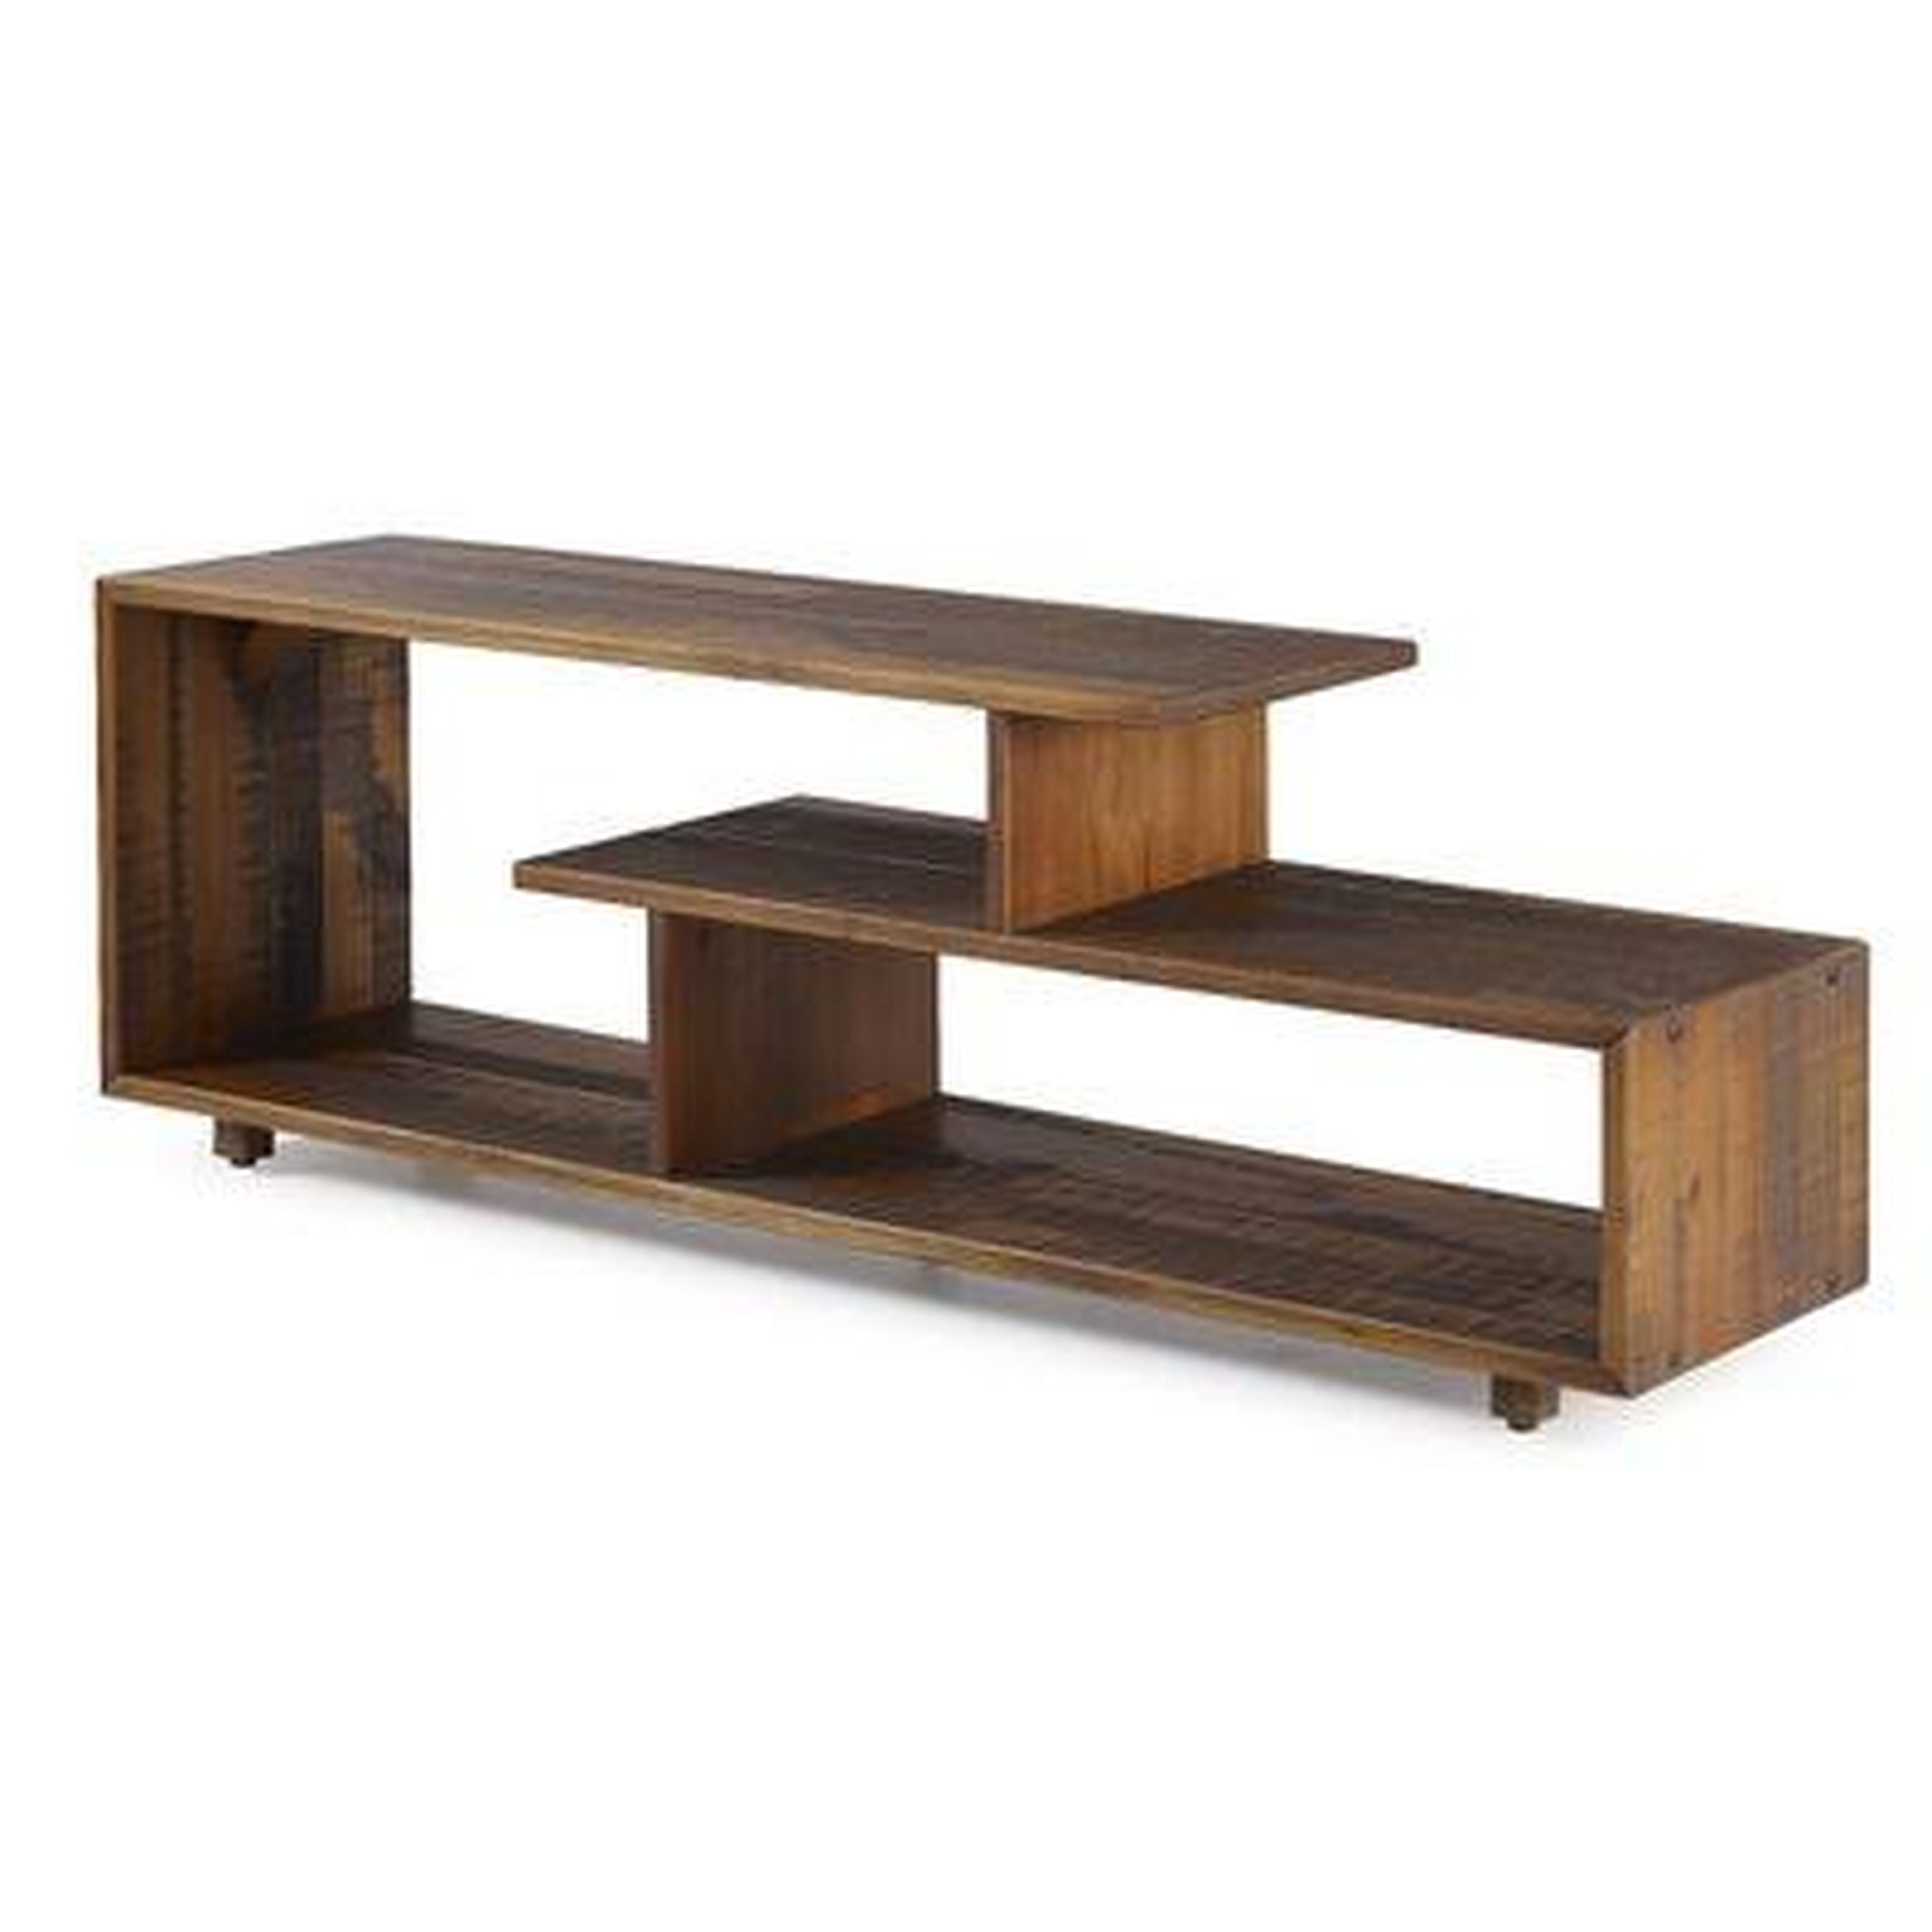 Carrasco TV Stand for TVs up to 50" - AllModern